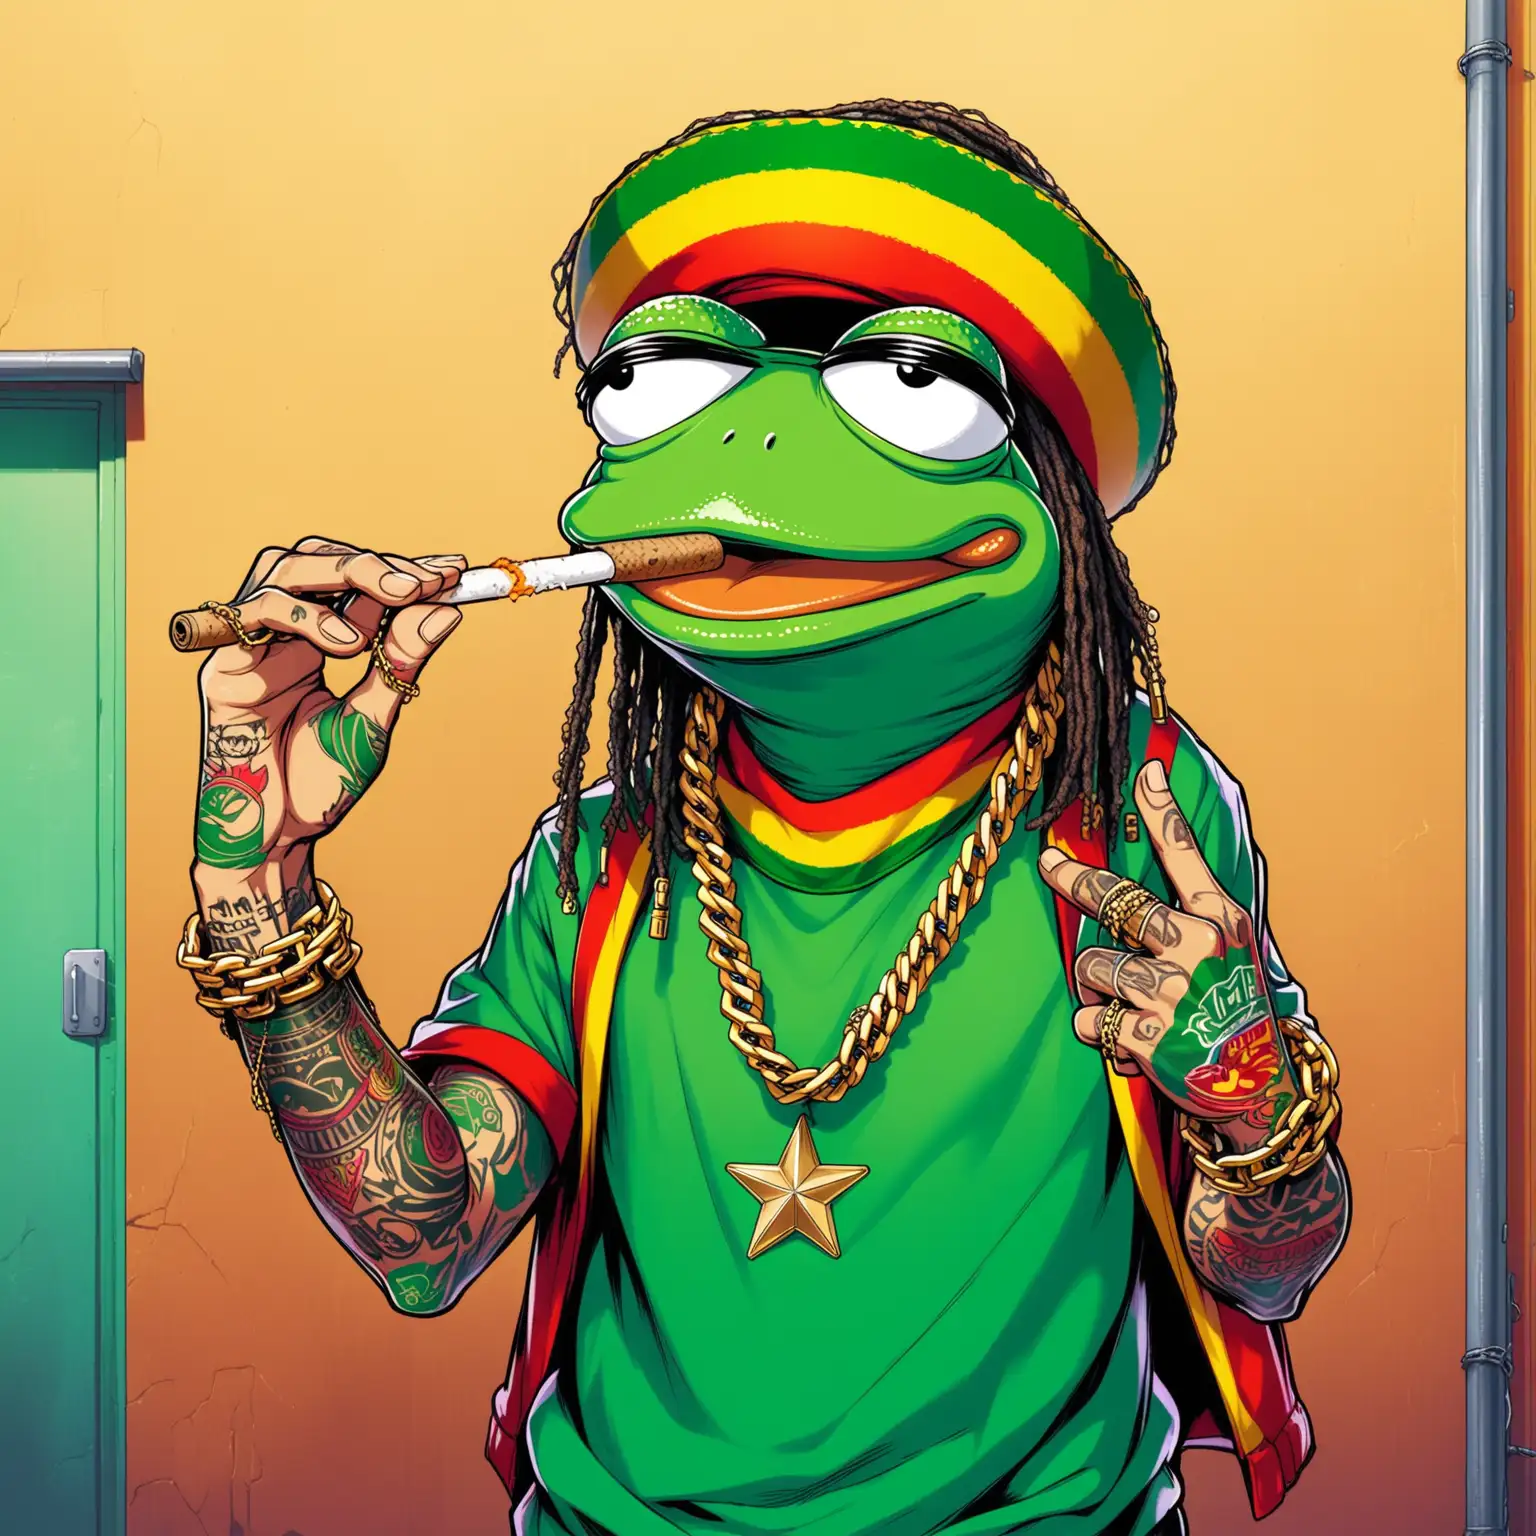 Urban Rapper Pepe the Frog in Rasta Costume with Joint